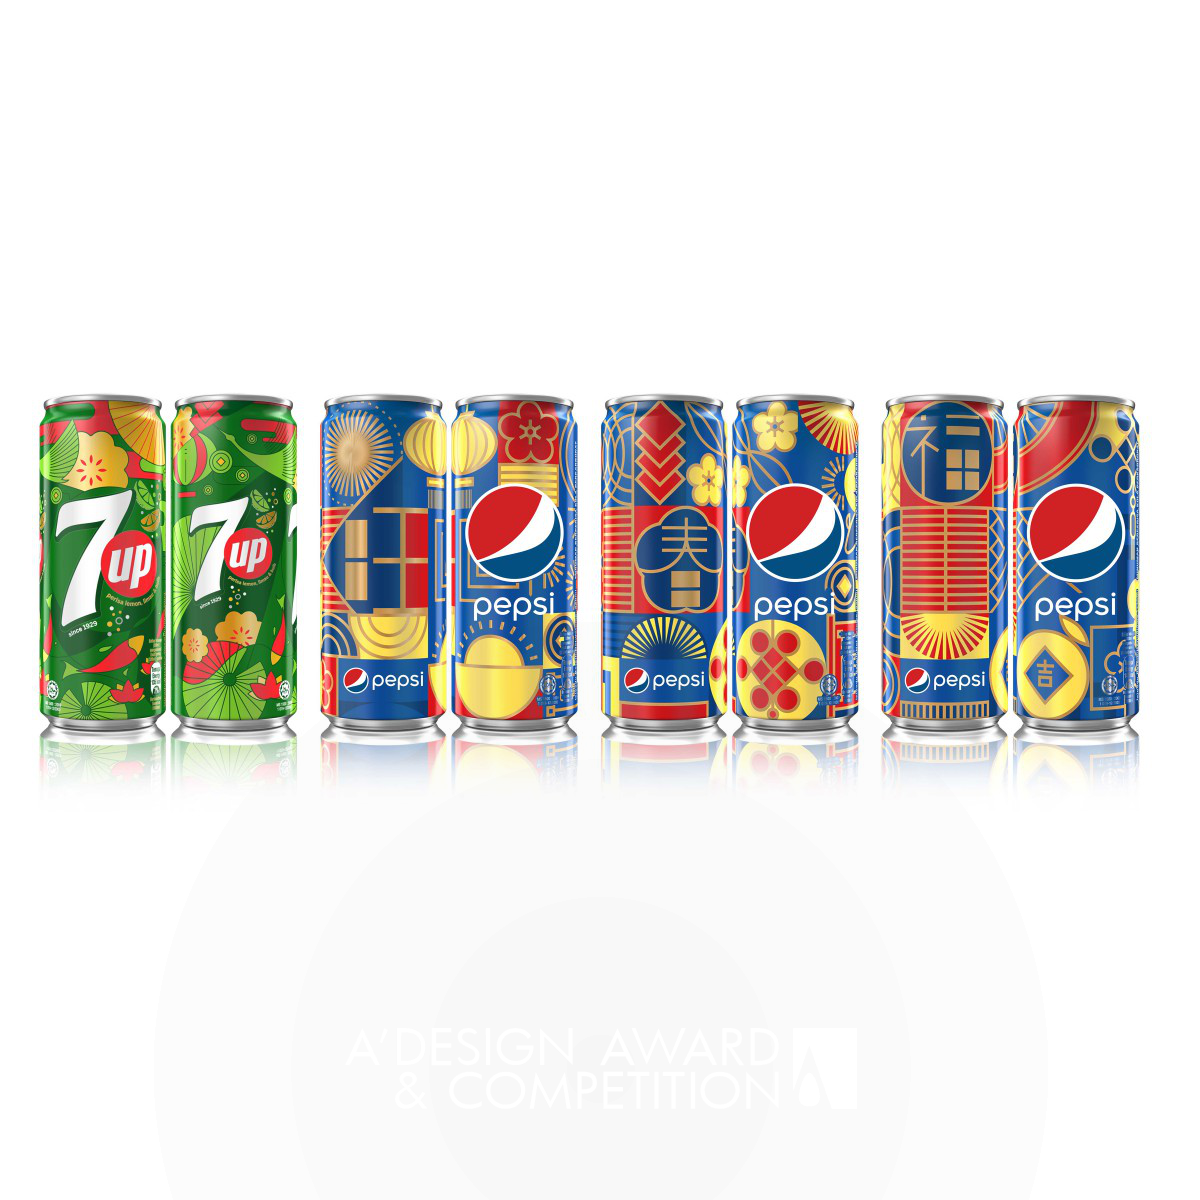 Pepsi x 7Up Chinese New Year LTO Cans <b>Brand Packaging